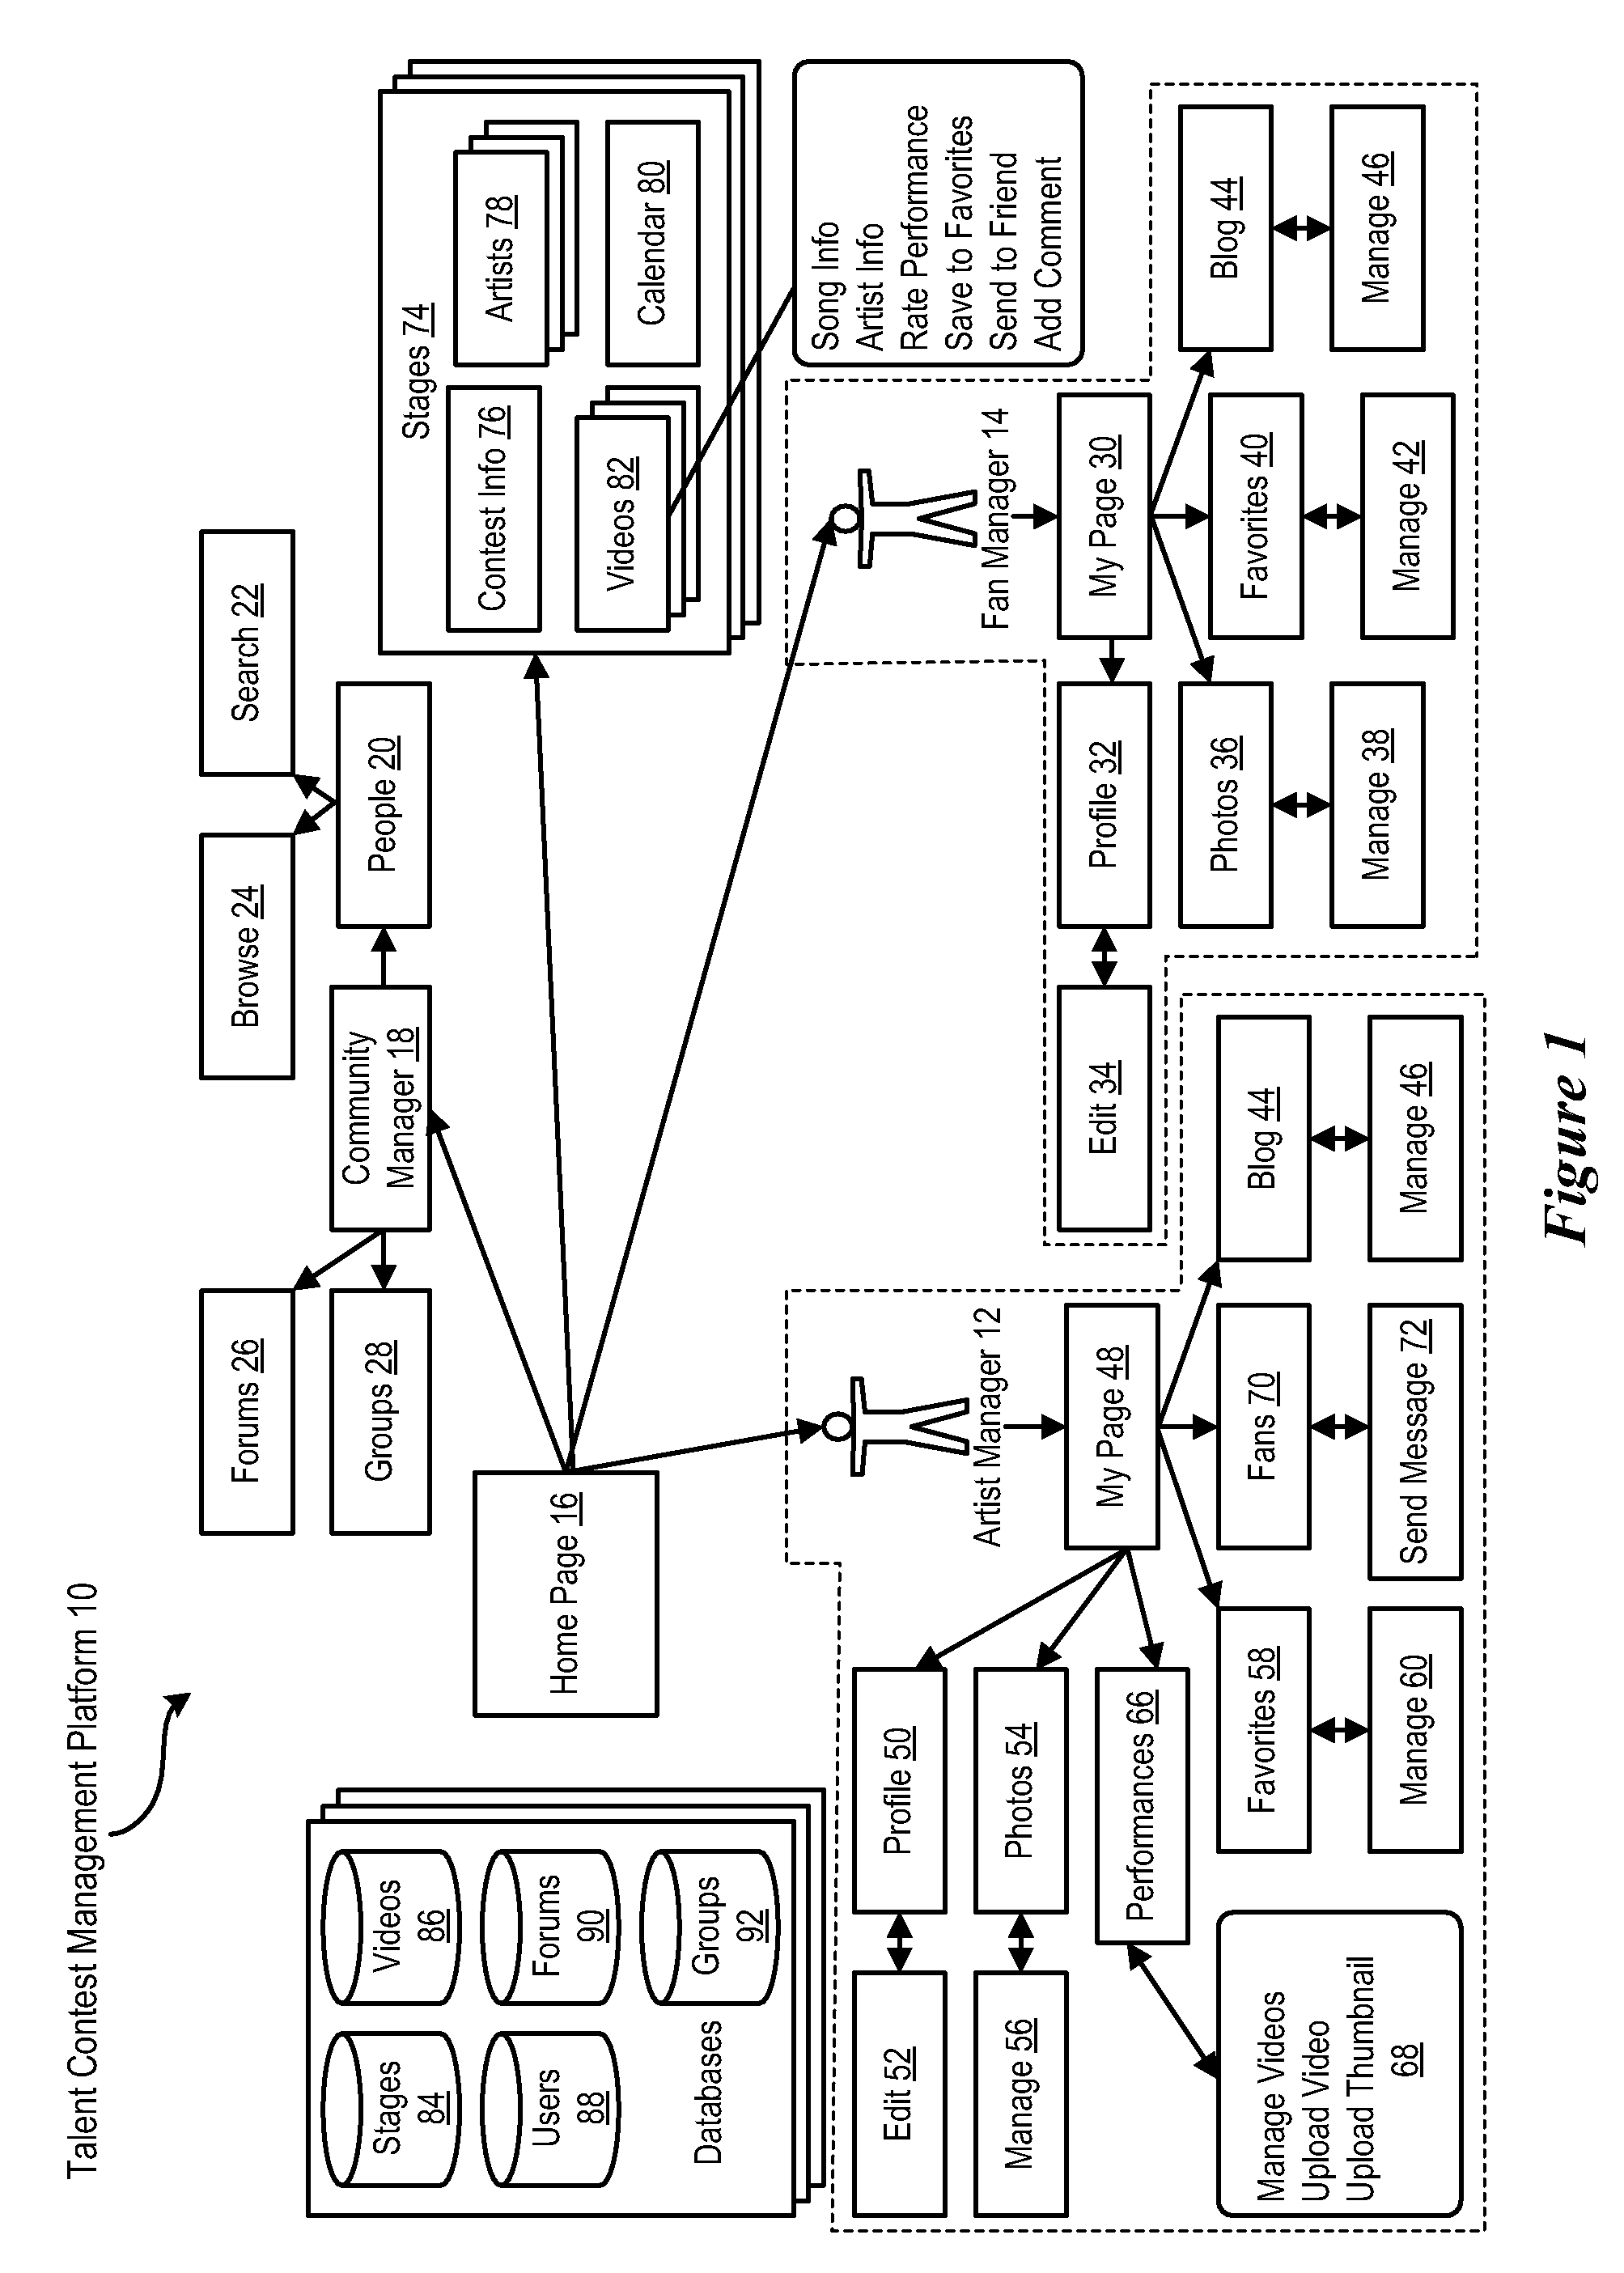 System and method for network-based talent contest